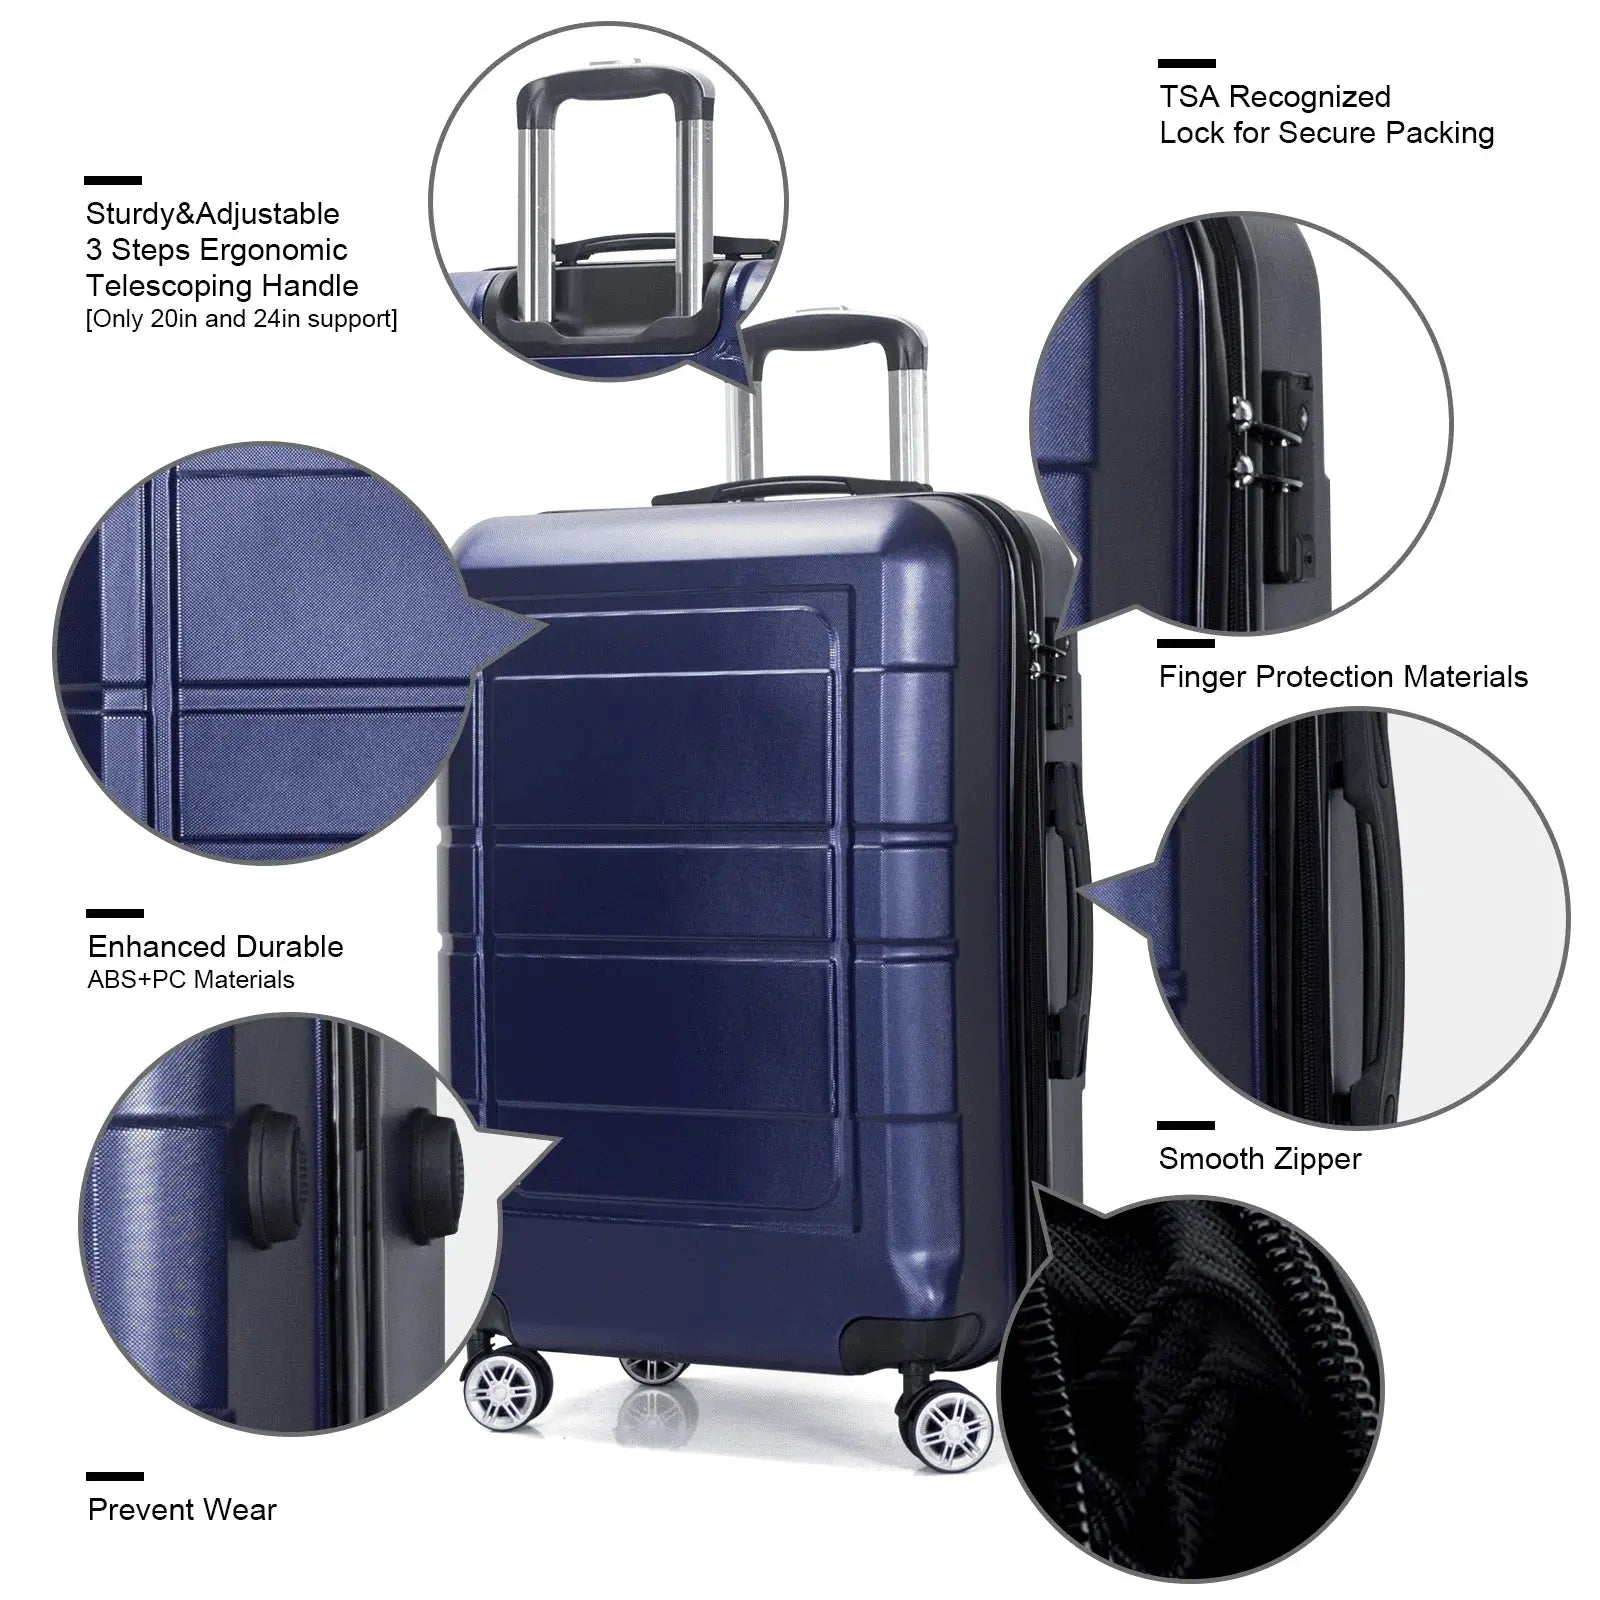 1/3 Piece Suitcase Luggage Sets, ABS Hardside Suitcase Set, TSA Lock, Carry On Luggage, Travel Suitcase with Spinner Wheel Pinnacle Luxuries